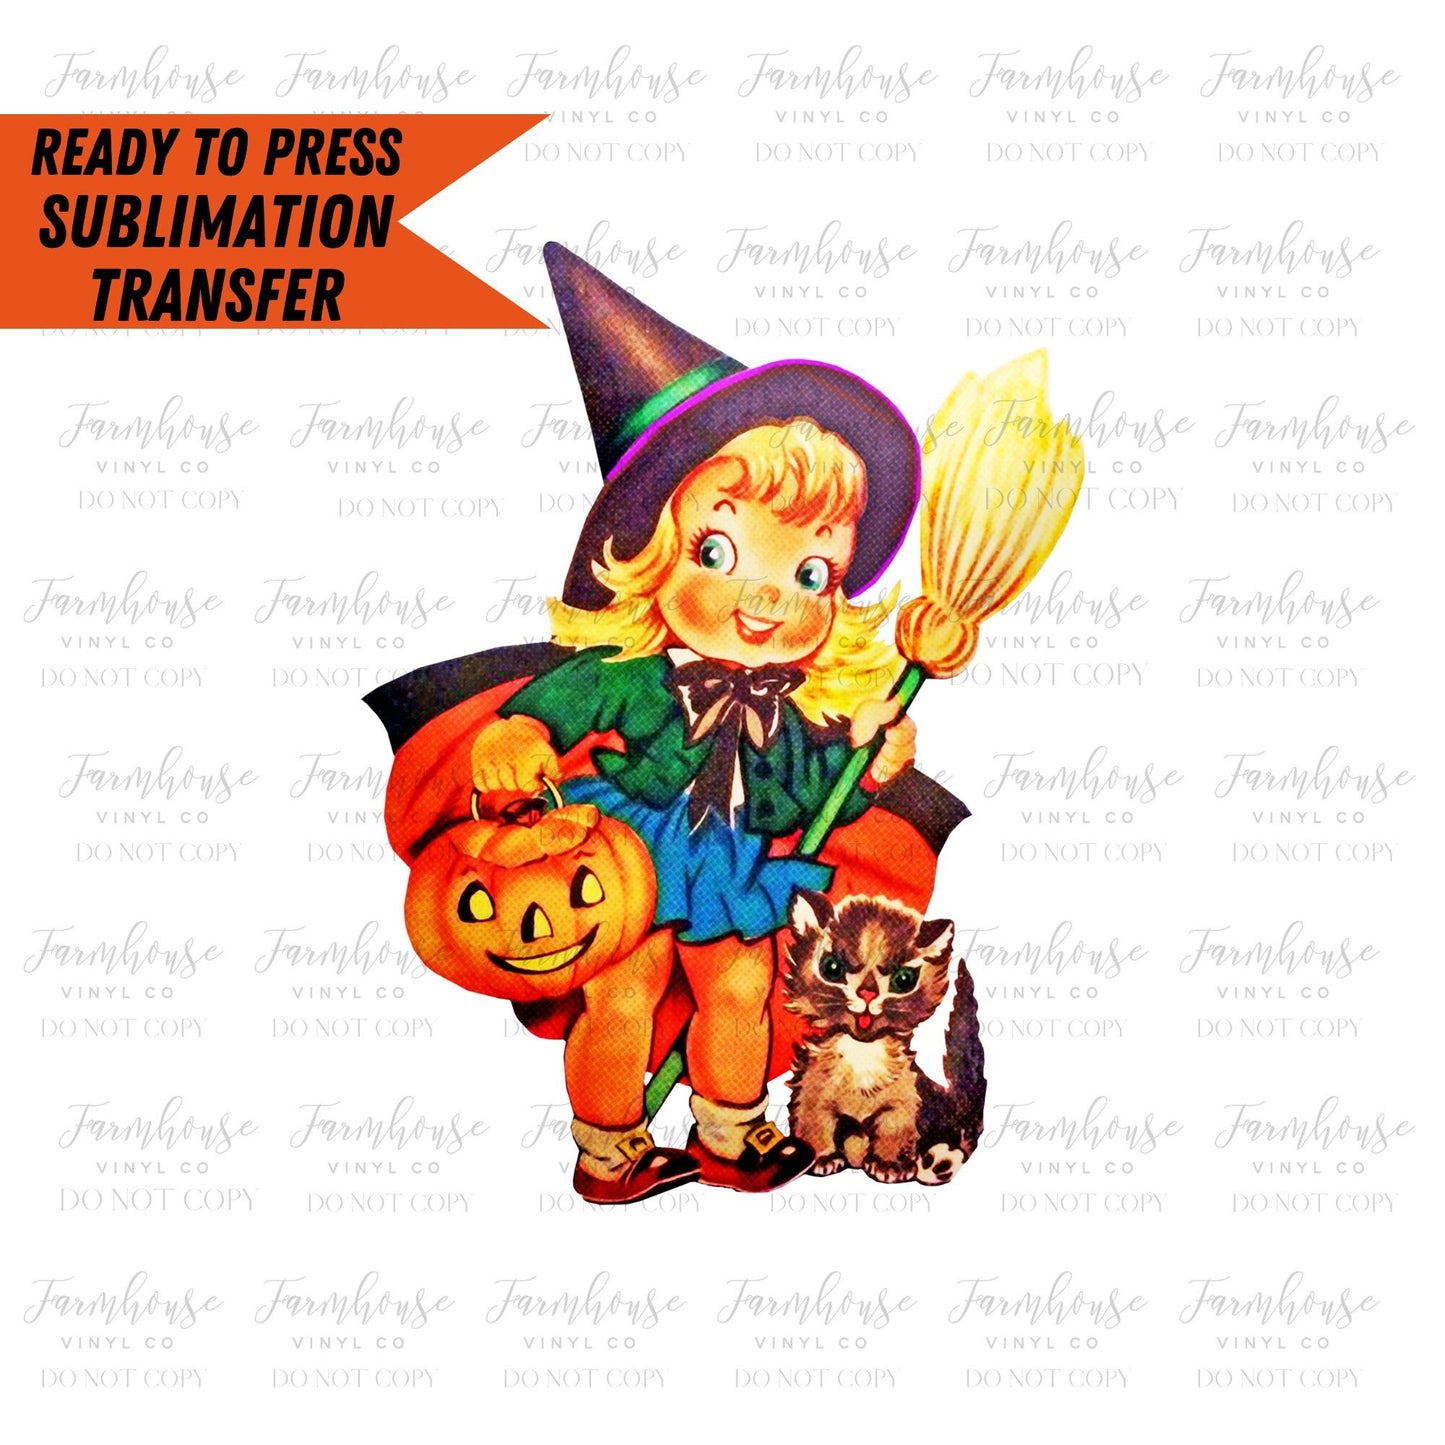 Vintage Halloween Girl Witch Designs, Ready to Press Sublimation Transfers, Sublimation design, Trick or Treat, 50's Halloween Design, Witch